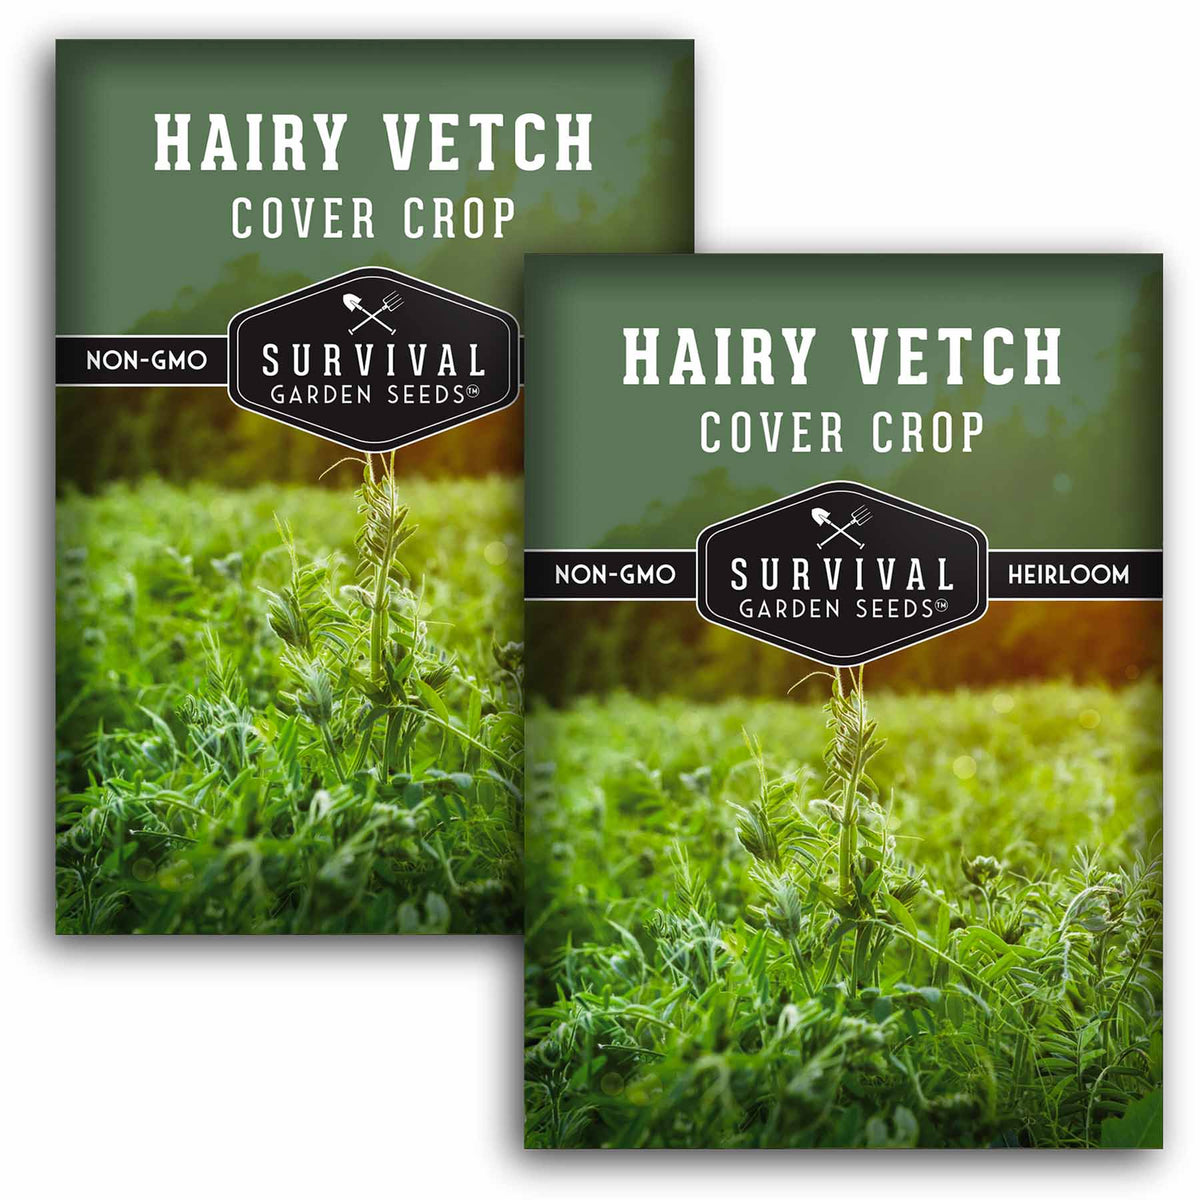 2 packet of Hairy Vetch seeds